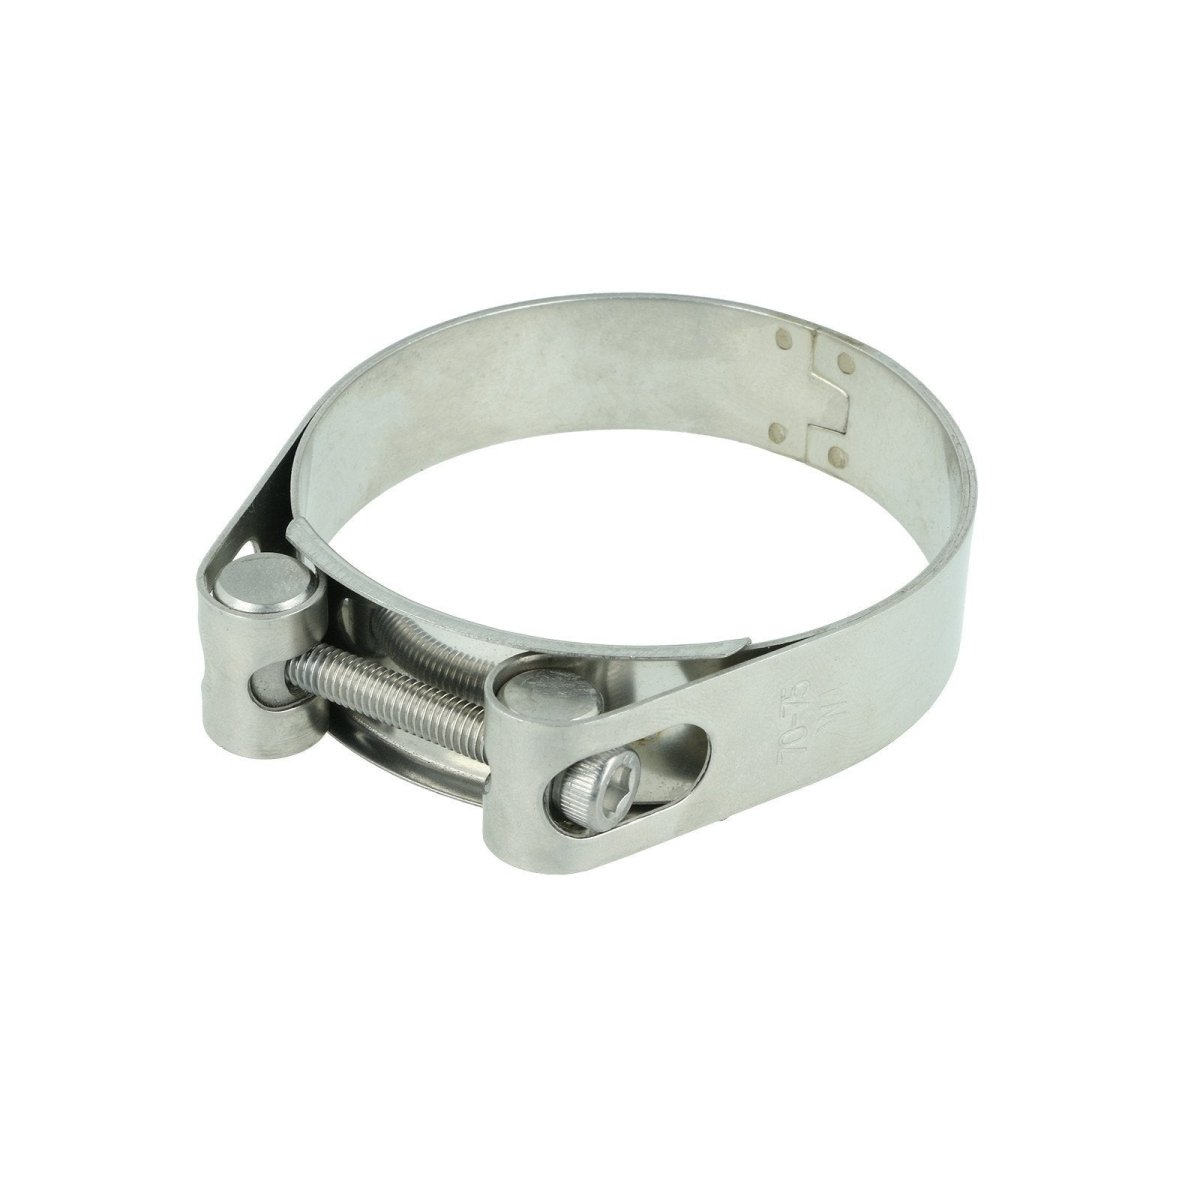 FAMEFORM high pressure resistant double band hose clamp all sizes (stainless steel) - PARTS33 GmbH